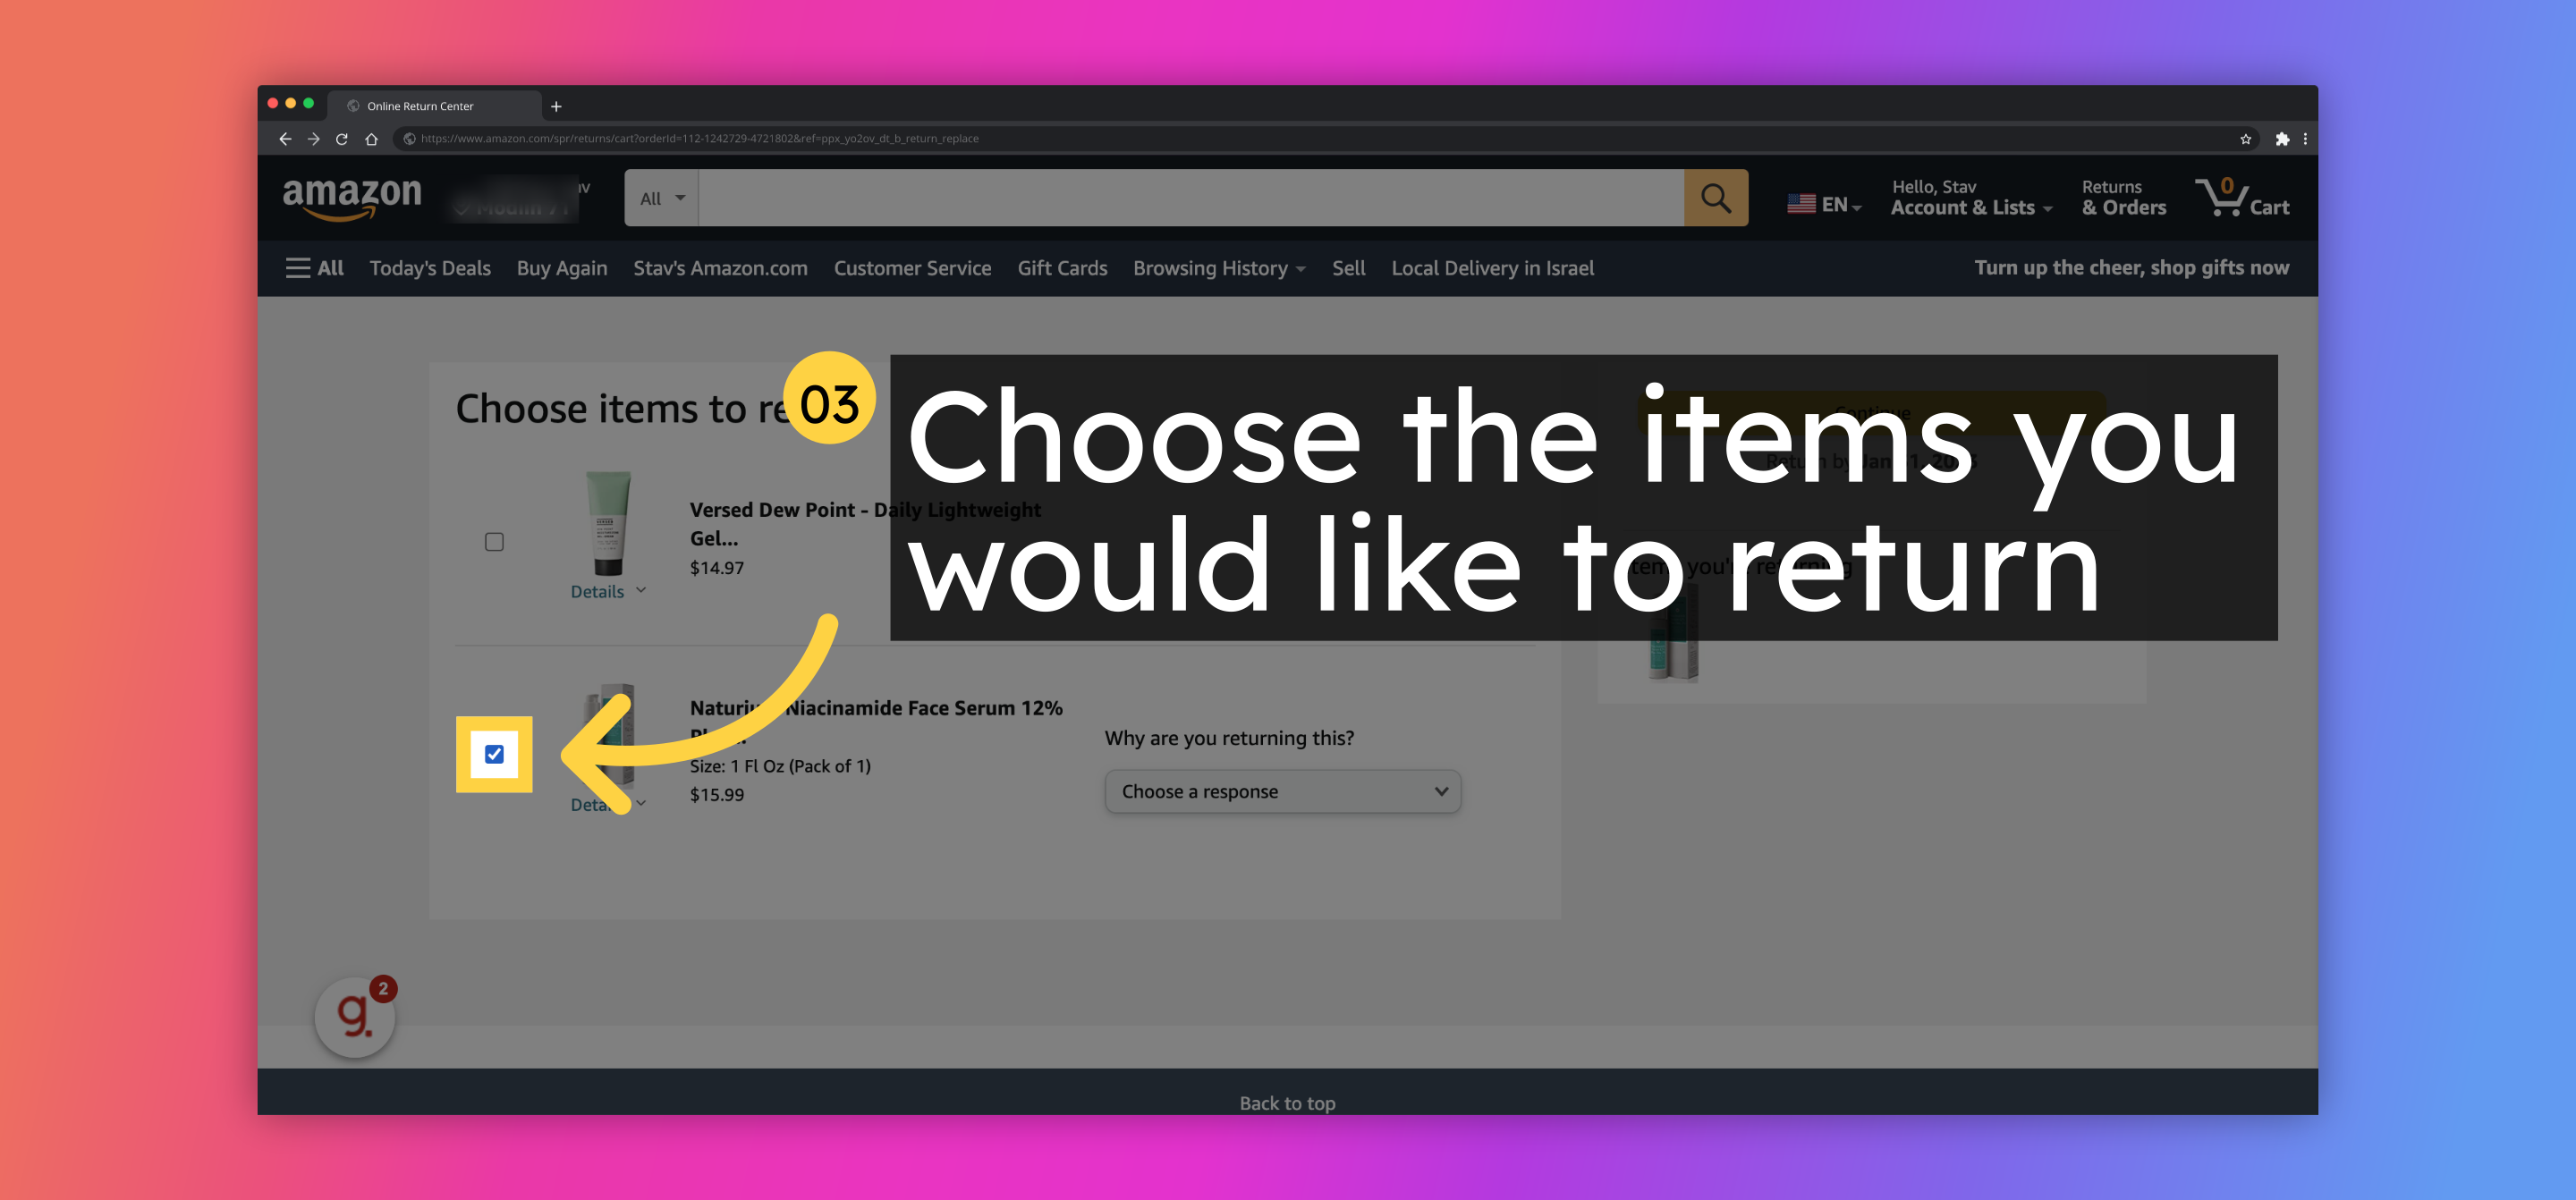 Choose the items you would like to return